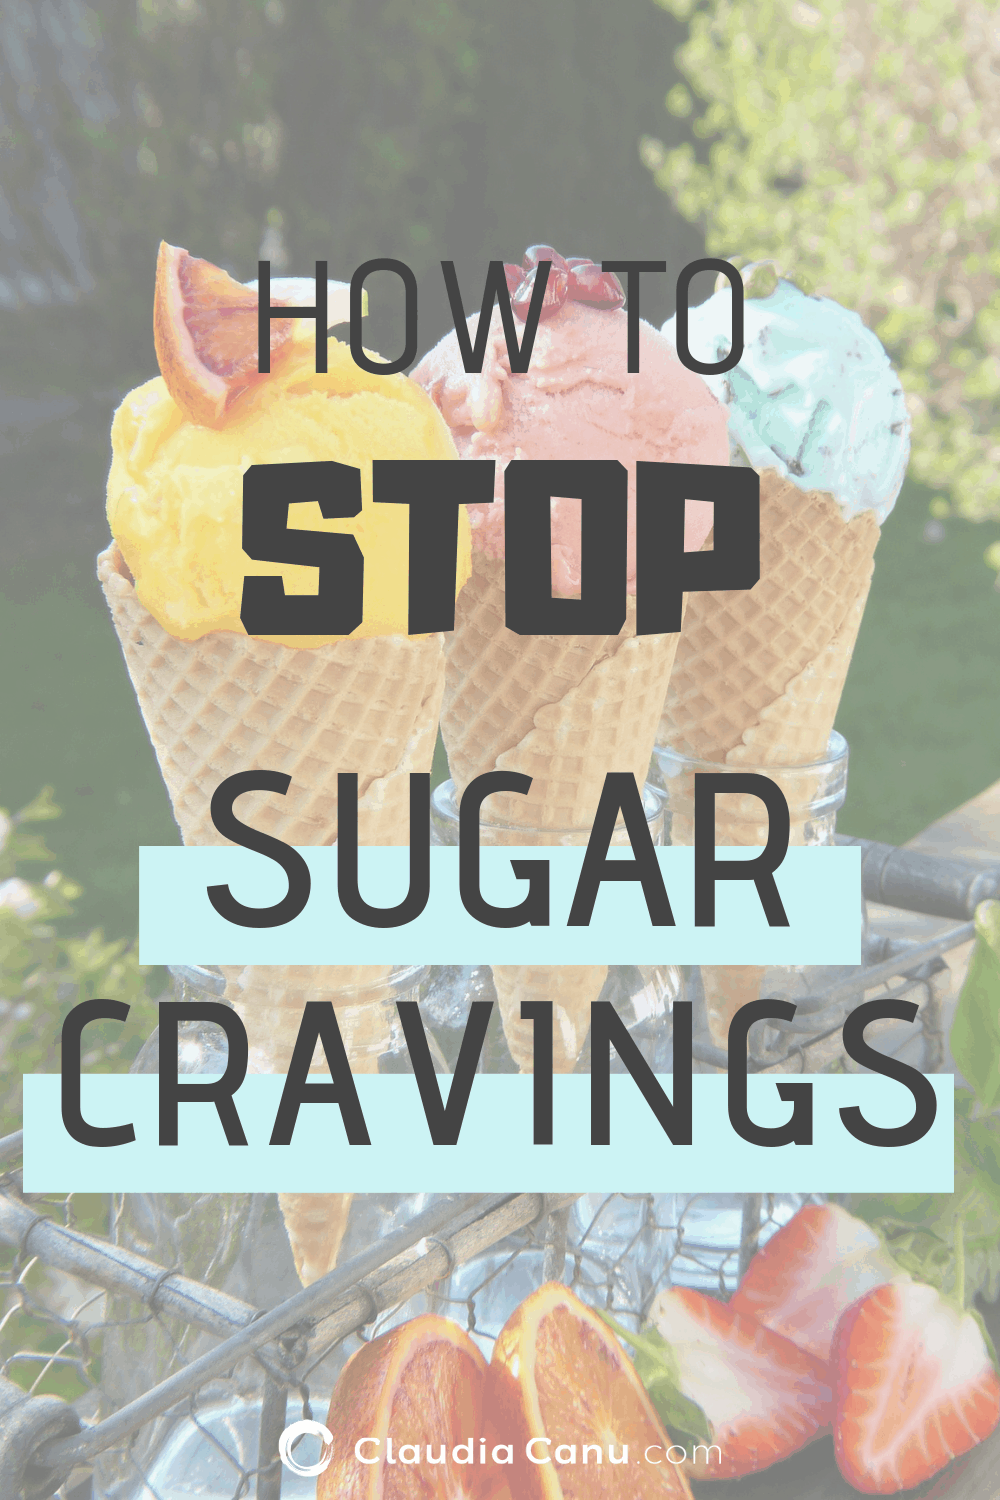 How to Stop Sugar Cravings For Good